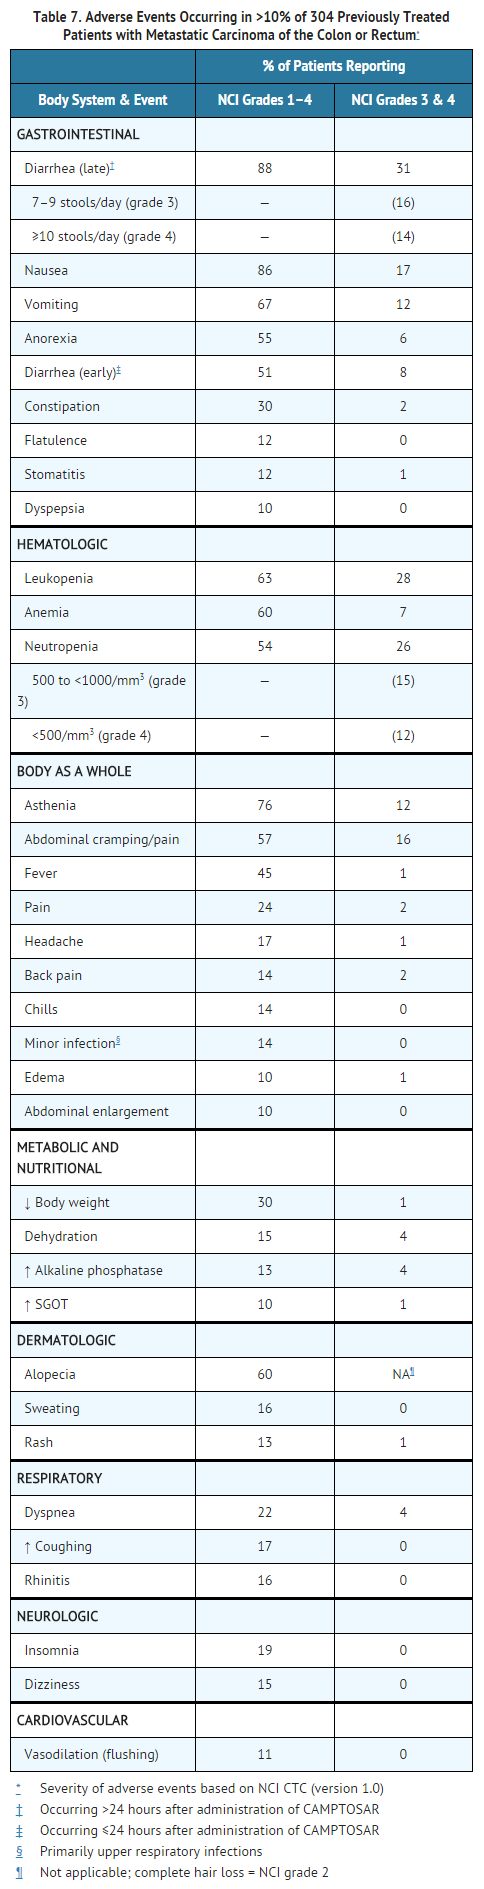 File:Adverse Events Occurring in Previously Treated Patients with Metastatic Carcinoma of the Colon or Rectum.png